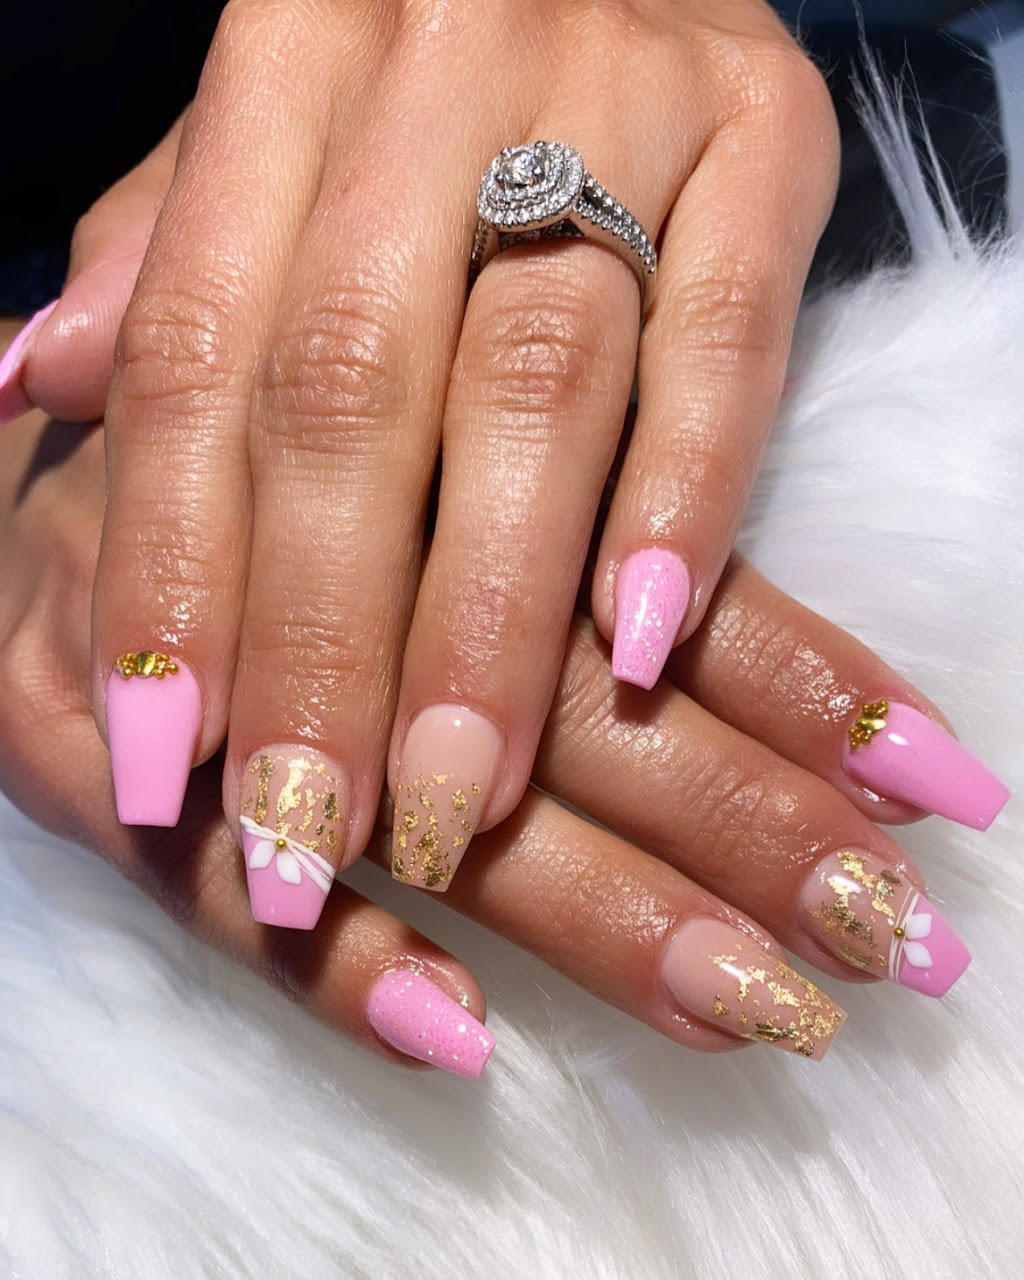 Nail by Alice | 11960 26 Ave SW, Edmonton, AB T6W 4P5, Canada | Phone: (587) 778-9633